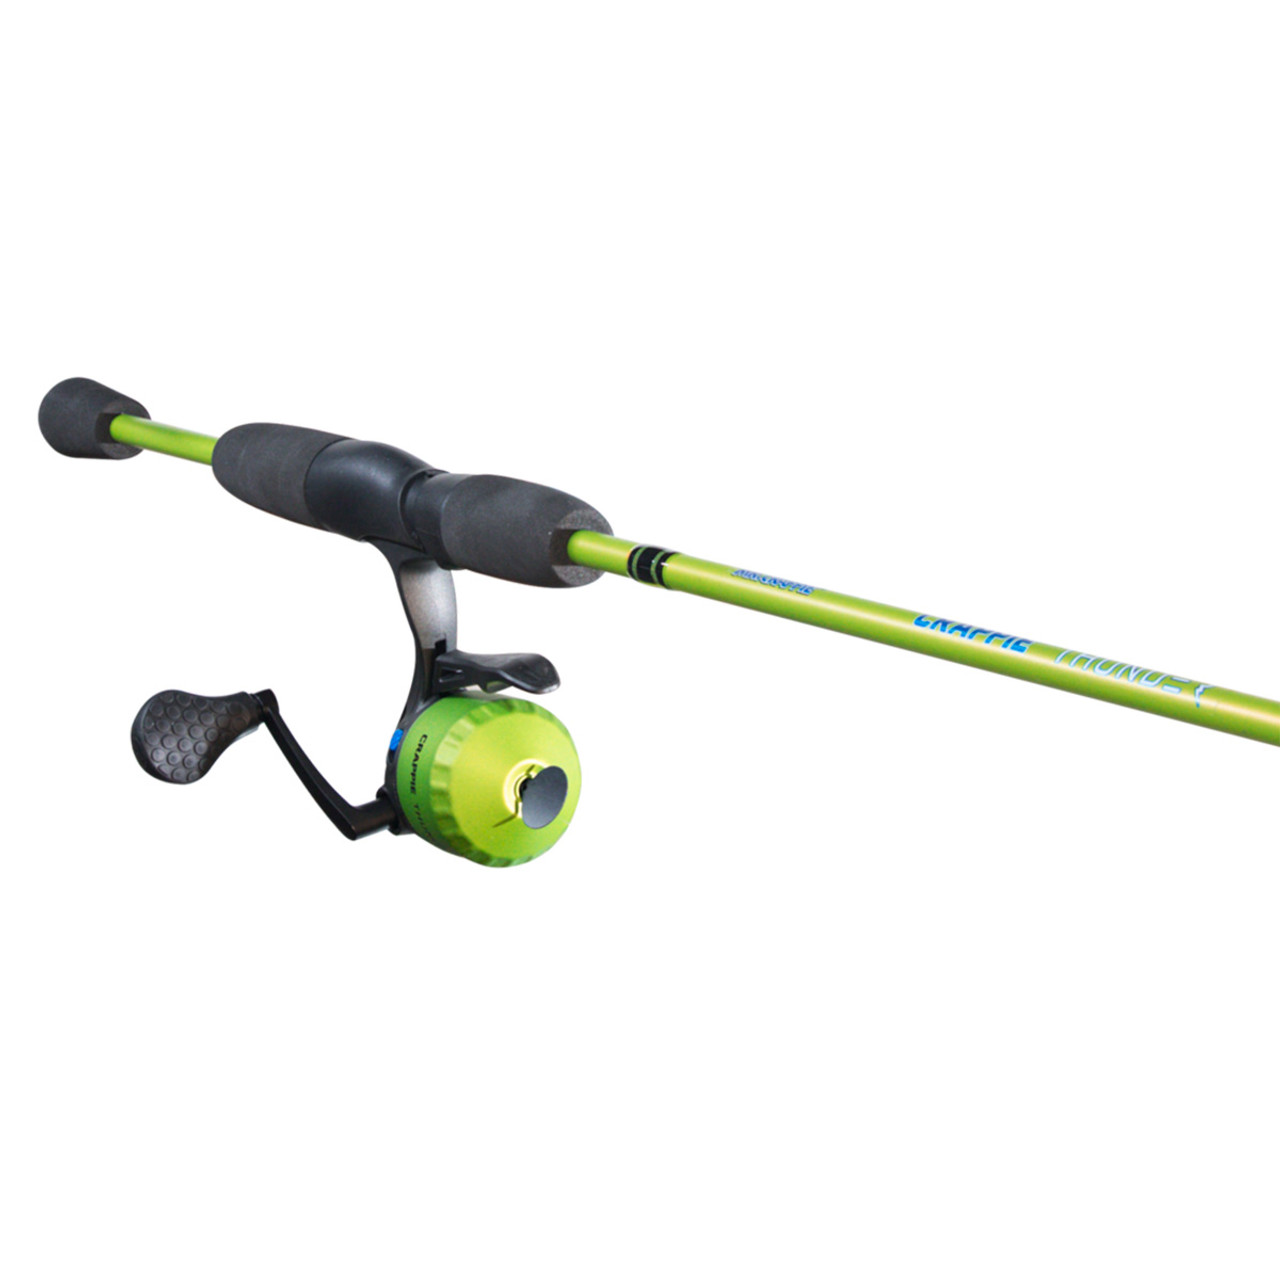 Crappie Thunder Underspin Rod and Reel Combo